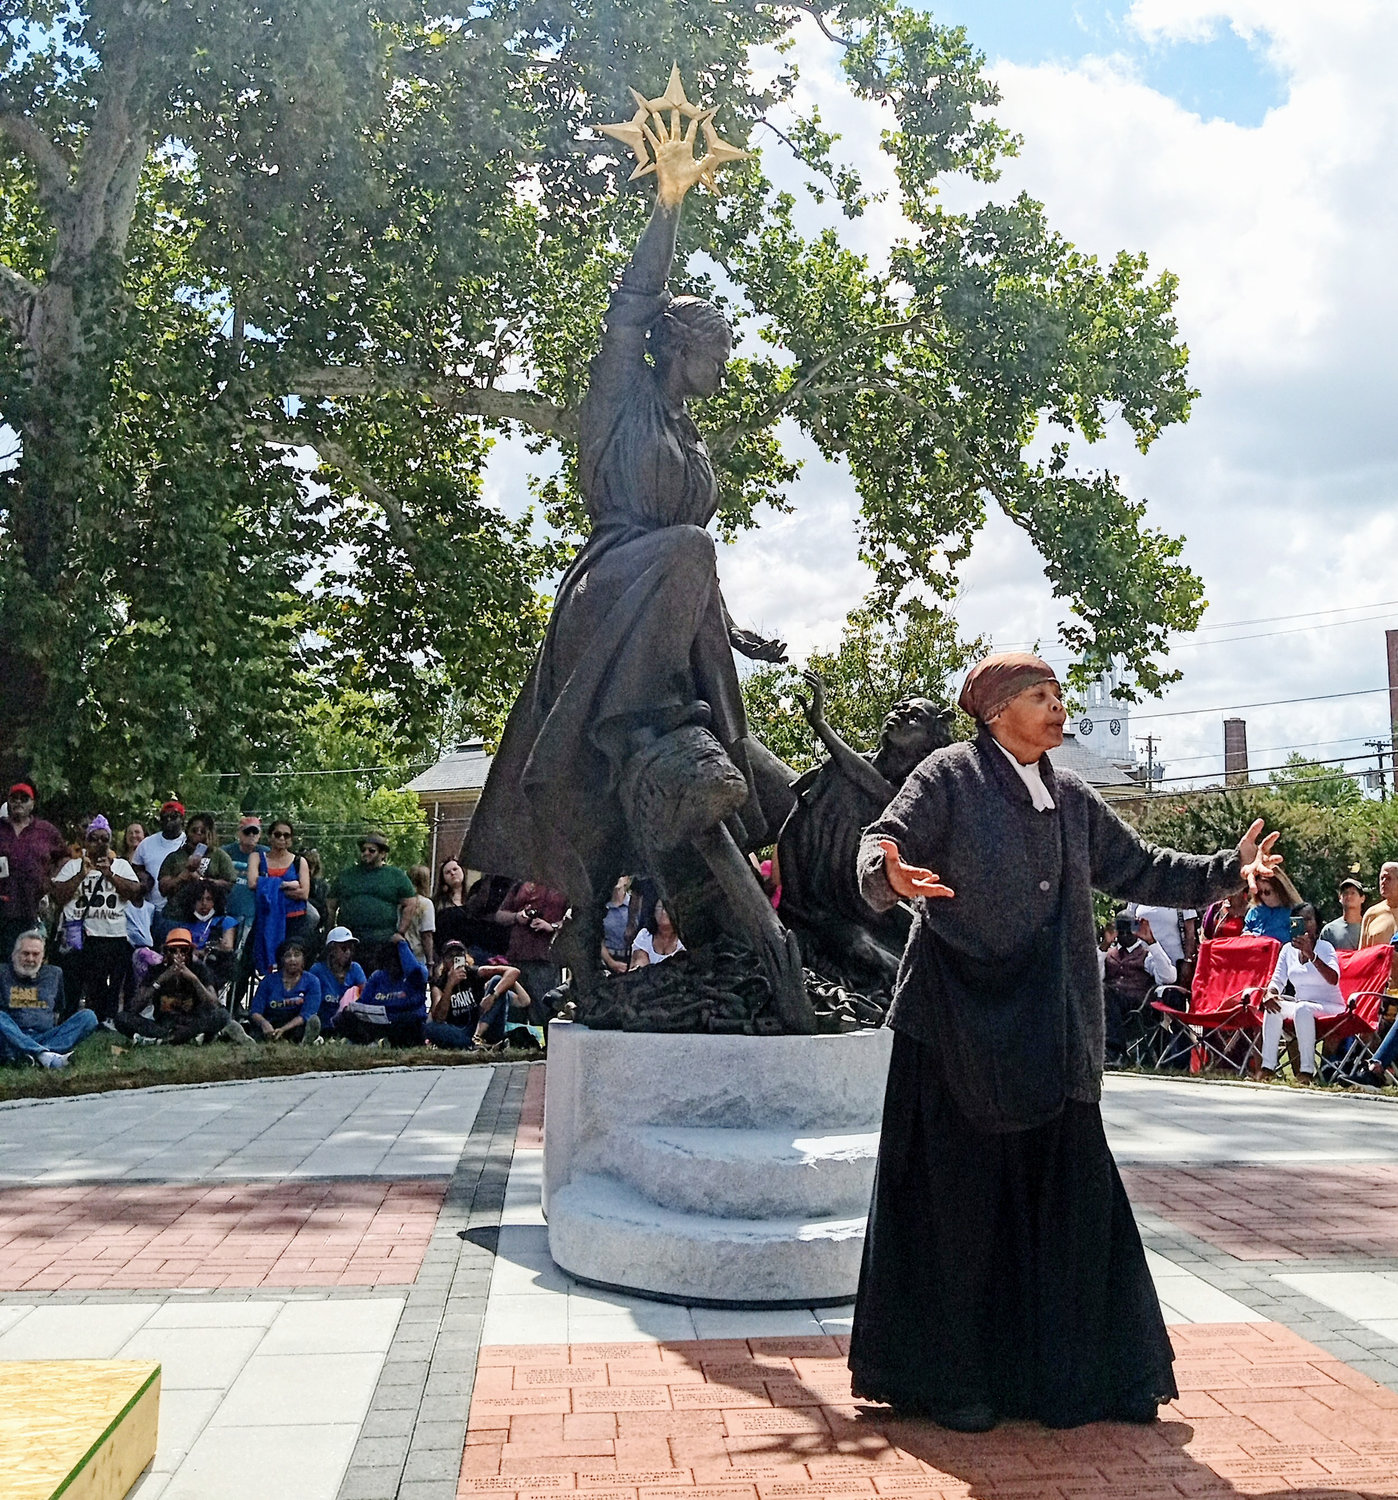 Harriet Speaks re-enactor Millicent Sparks brings Tubman's words to life after the statue is unveiled.